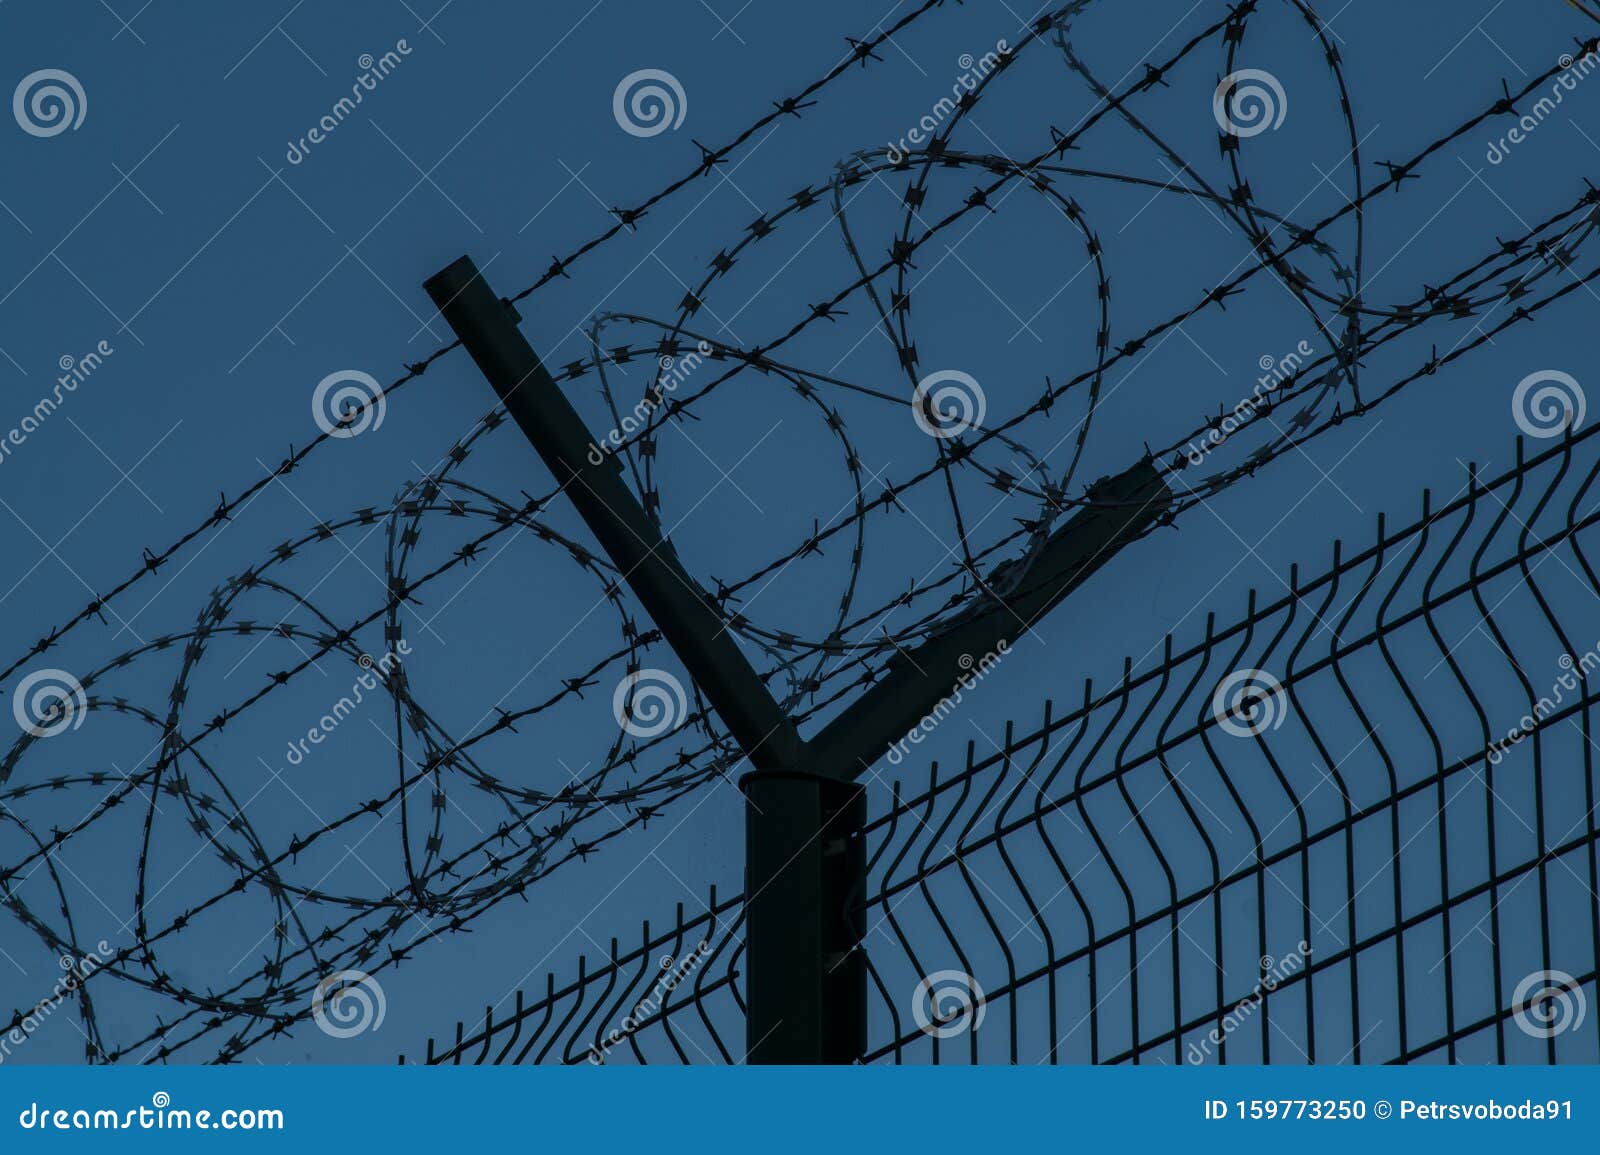 barbed wire steel fence against the immigrants in europe. restricted area at night.